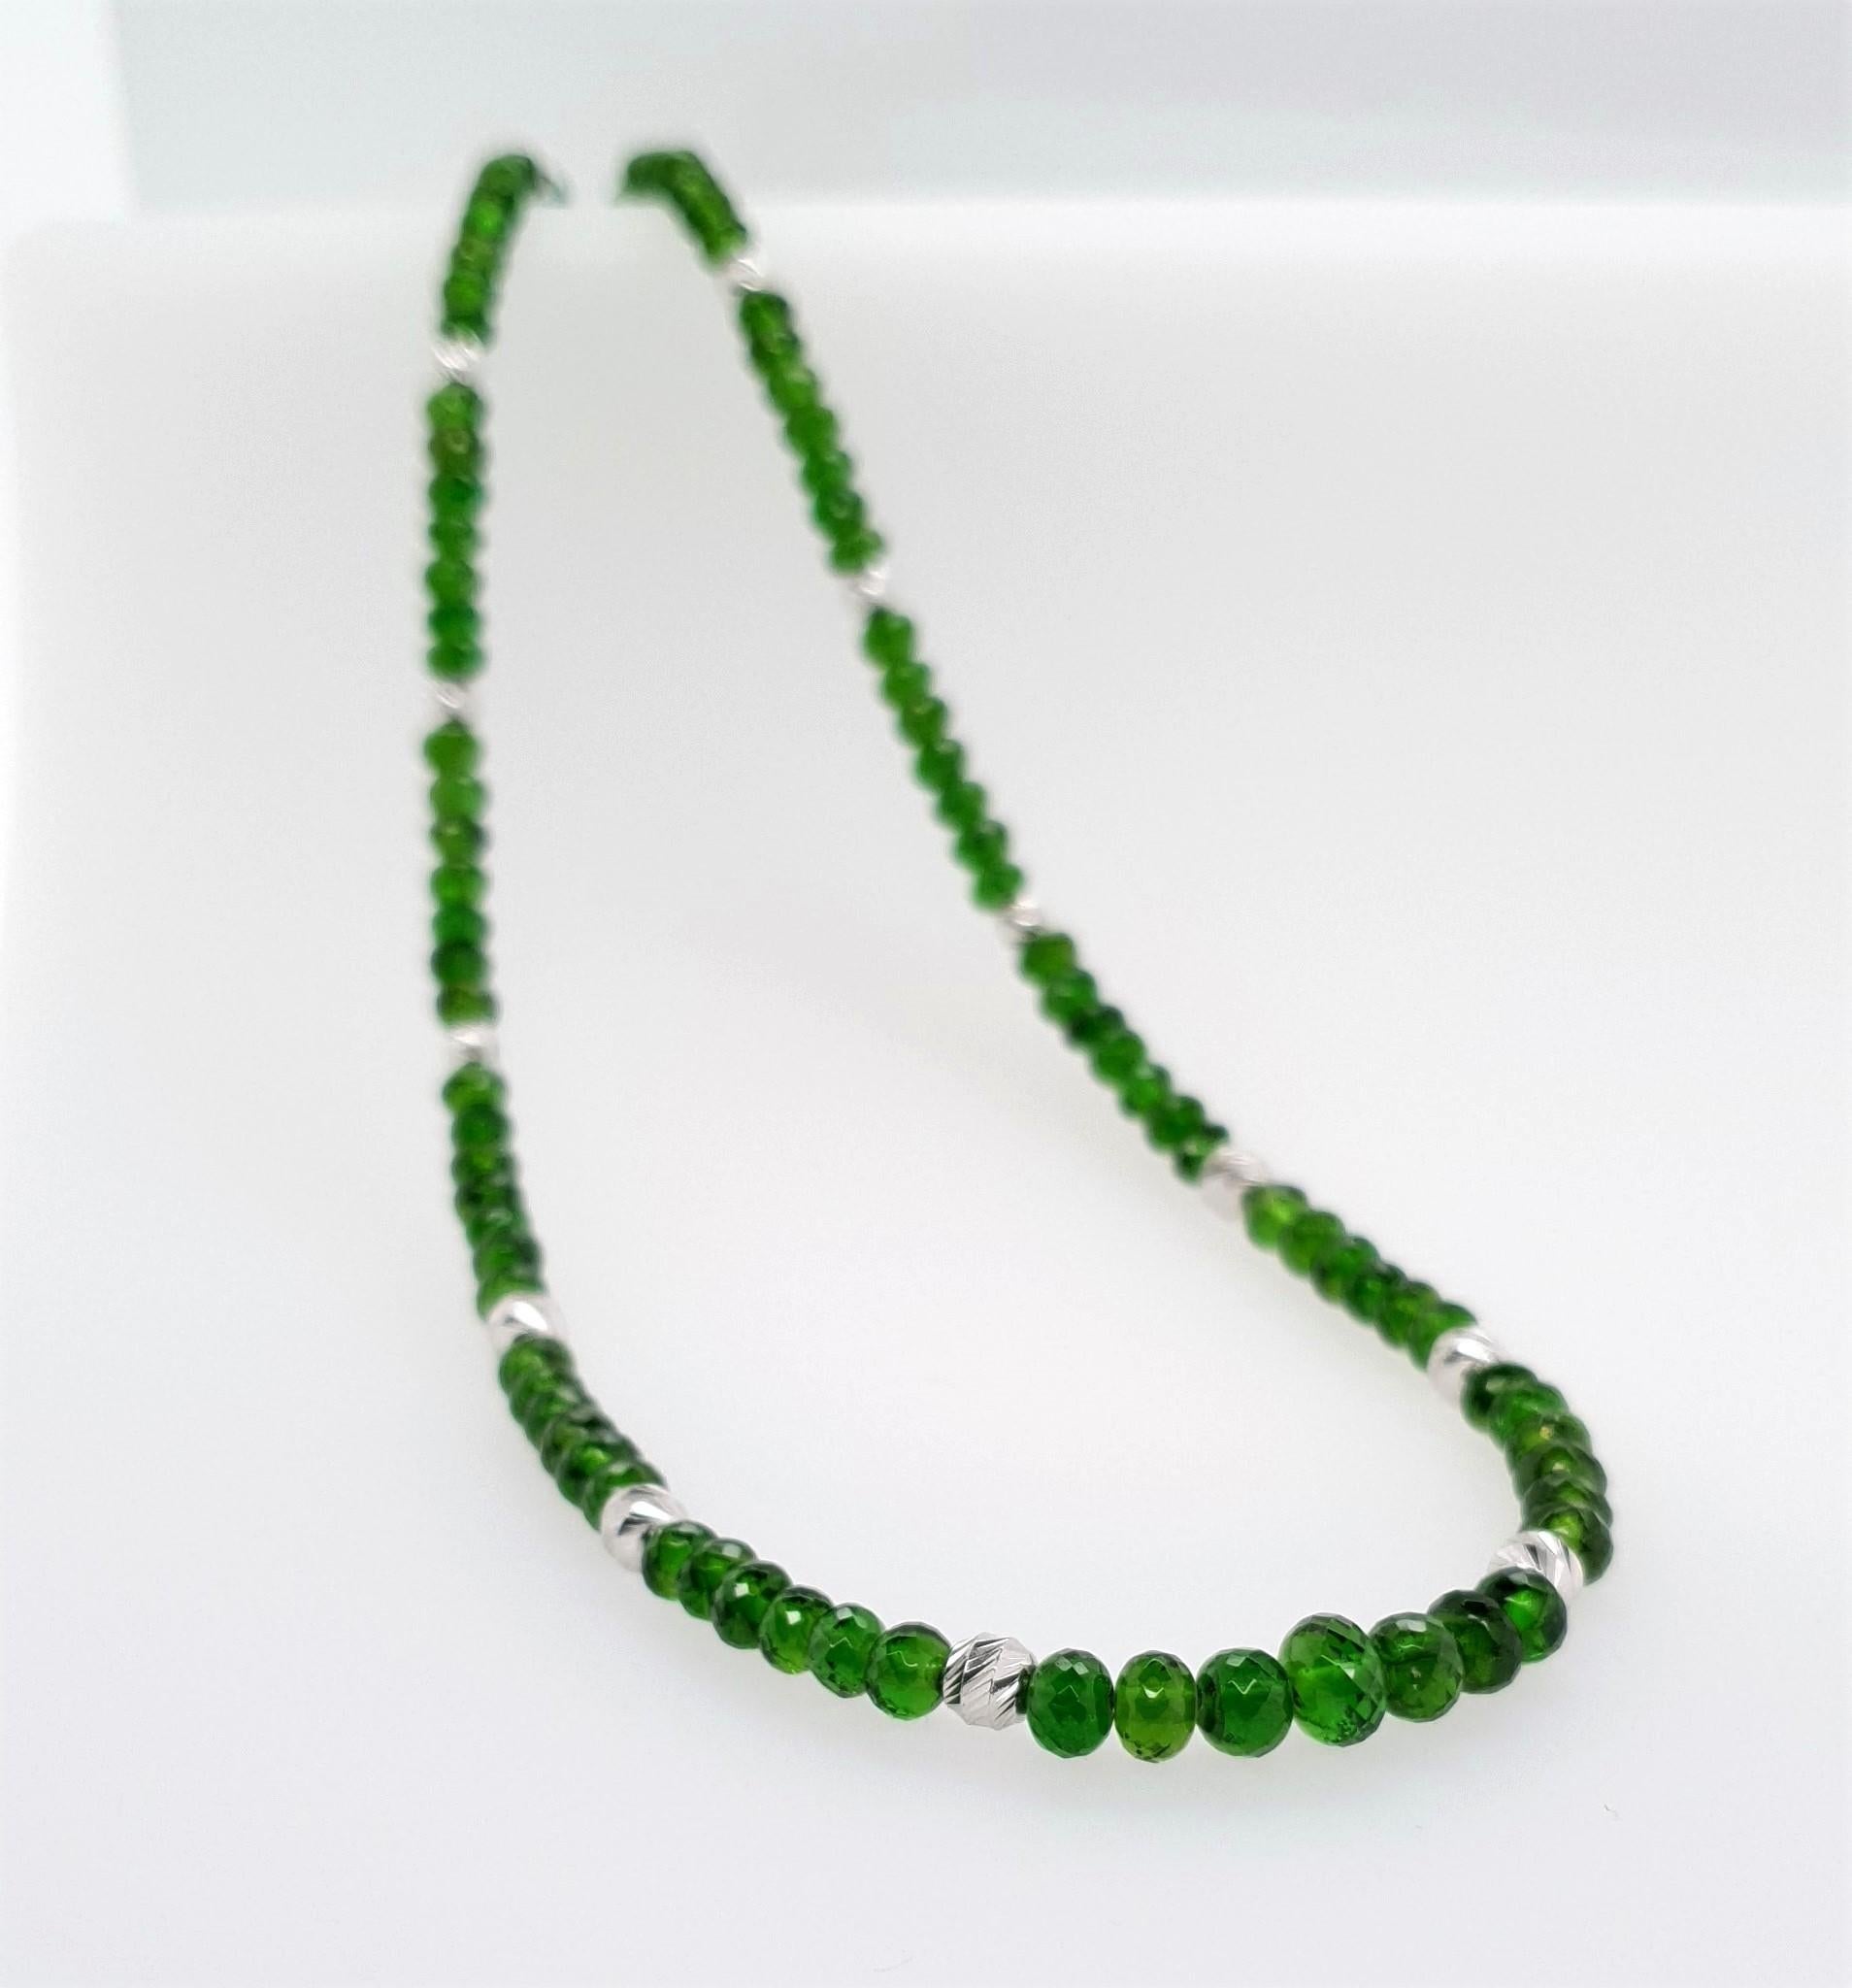 This faceted Emerald Green Chromium Diopside Rondel Beaded Necklace with 18 Carat Gold is totally handmade. Cutting as well as goldwork are made in German quality. The lobster clasp is easy to handle.
Timeless and classic design combined with